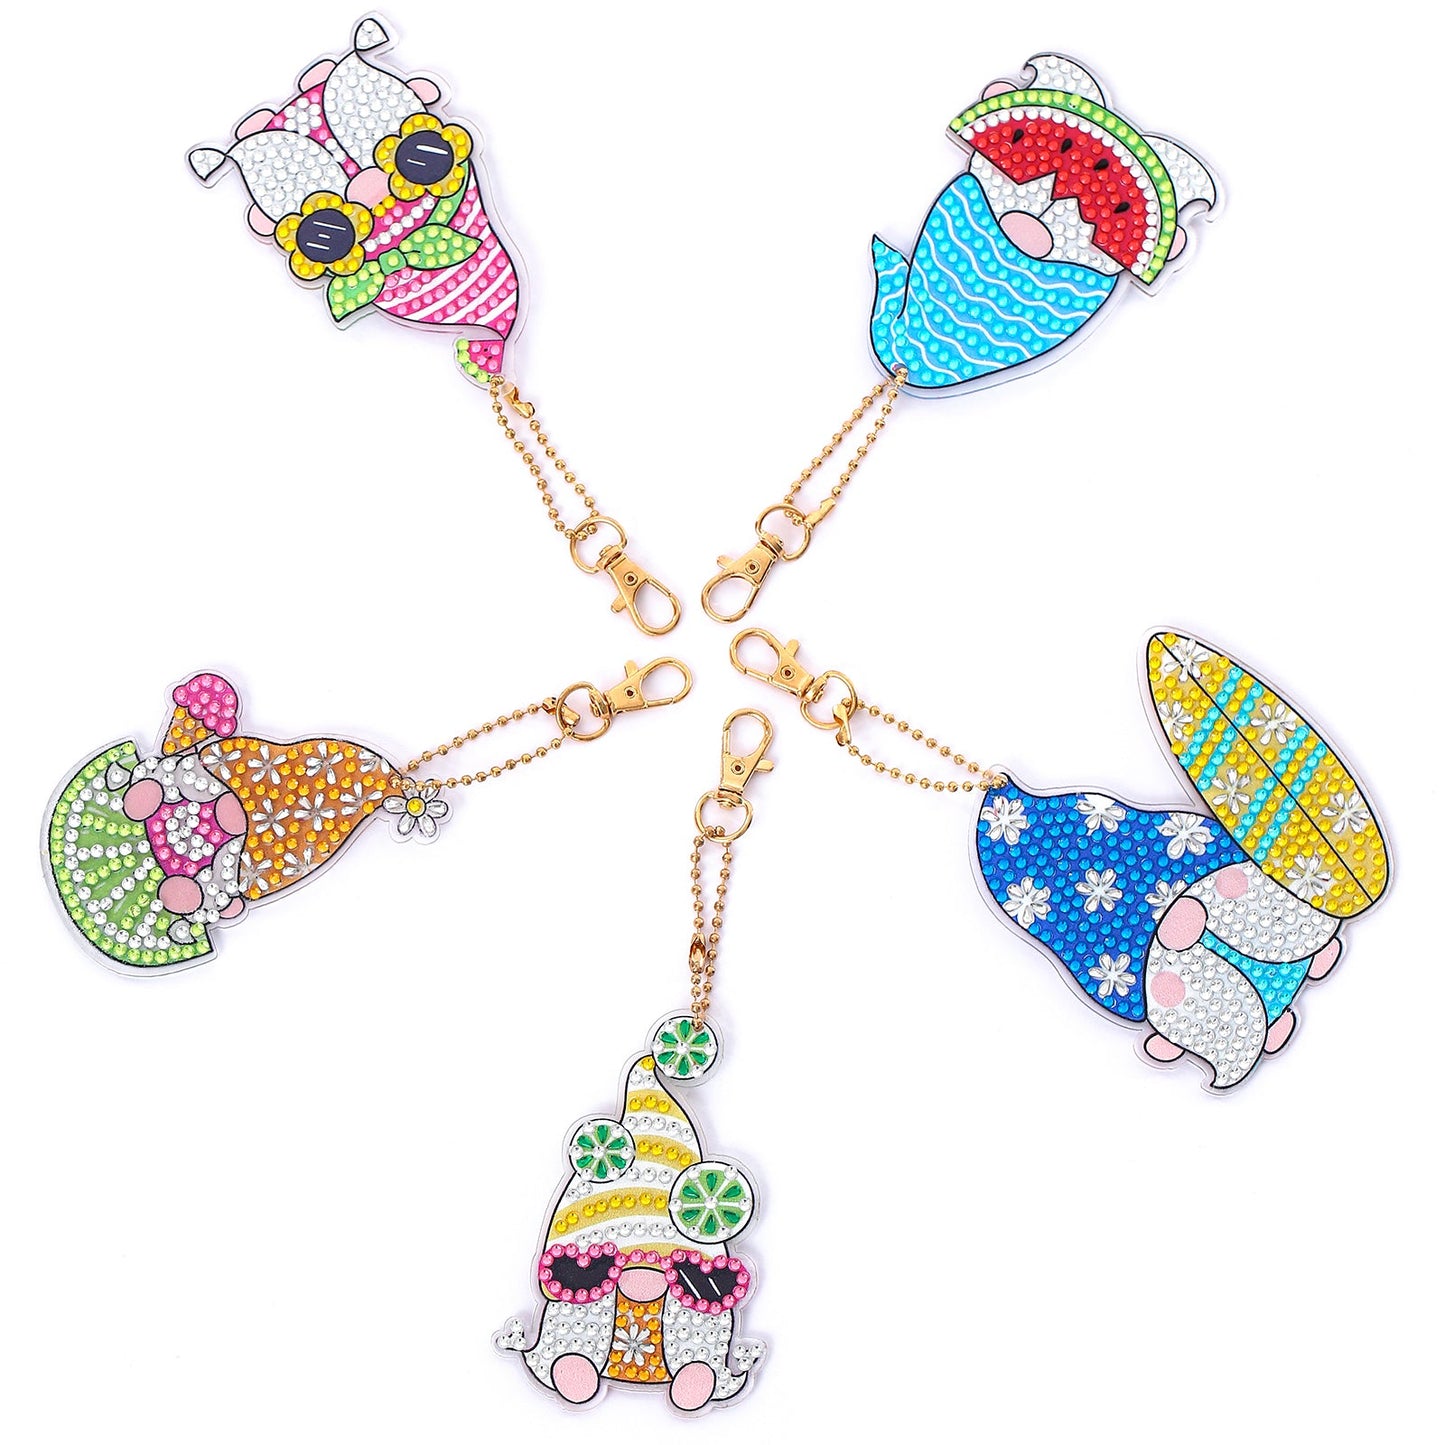 Blingbling's Keychain | Goblins | Five Piece Set